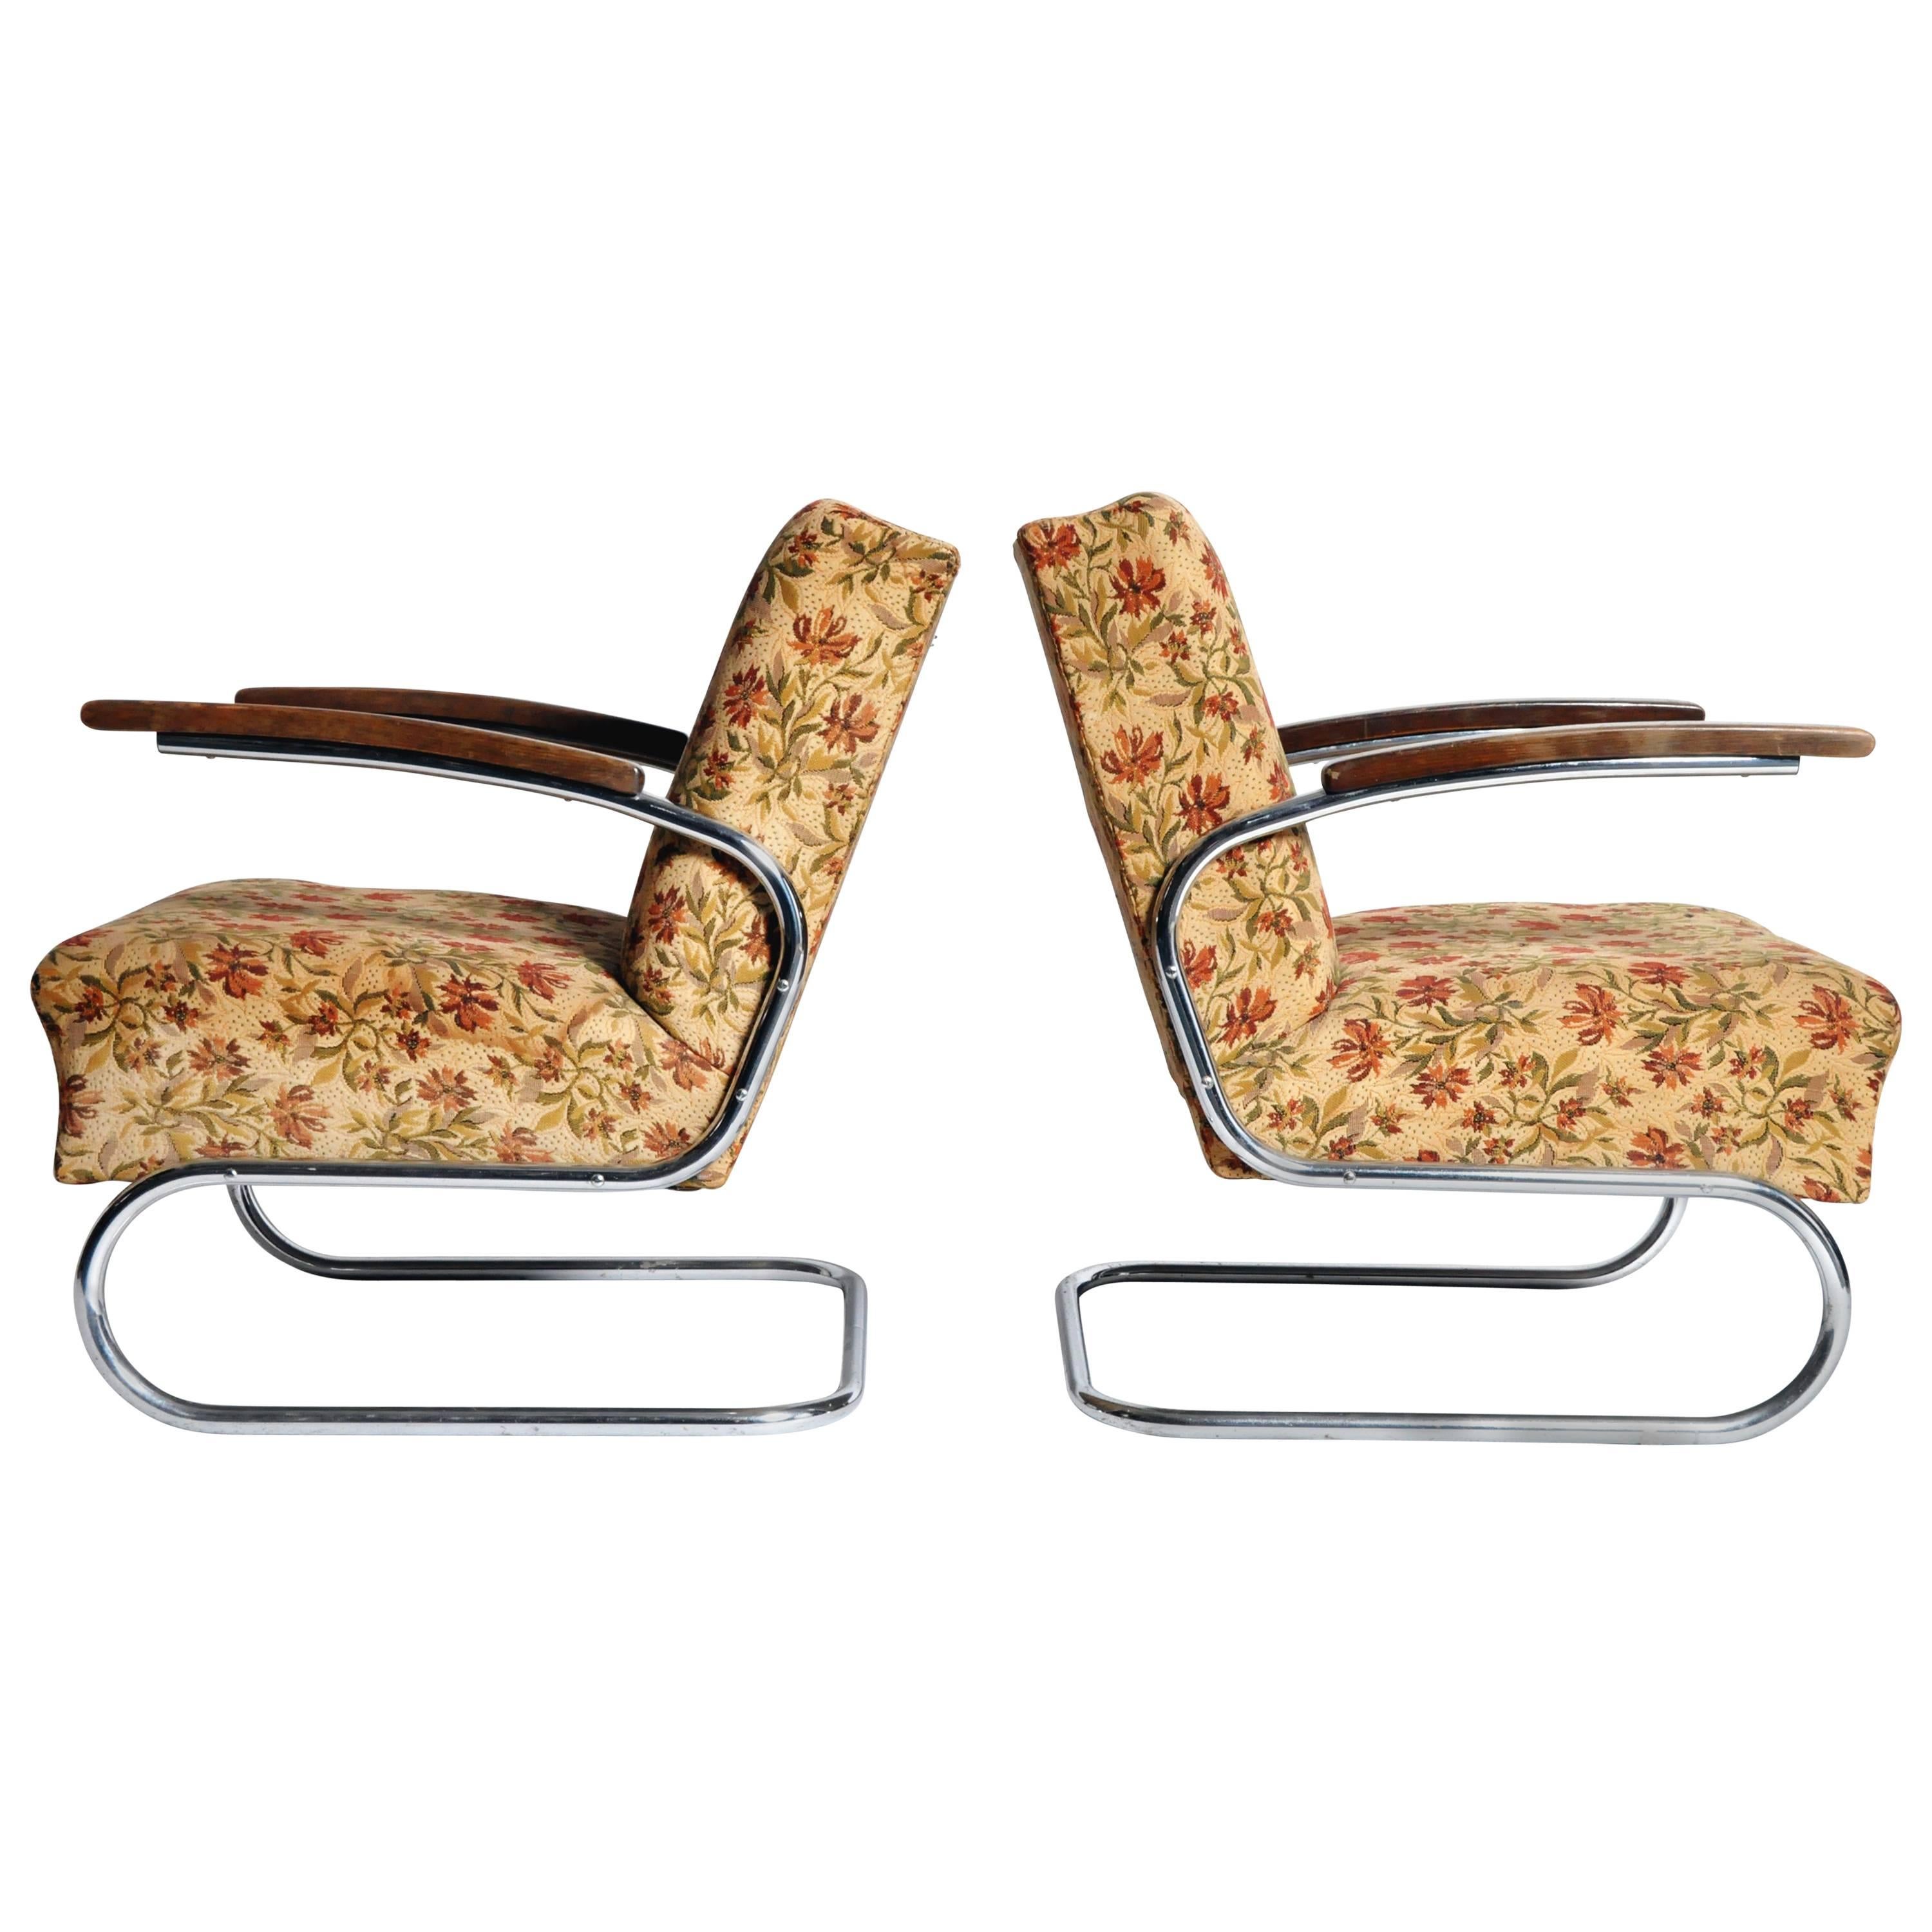 Pair of Chairs with Curved Chrome Legs